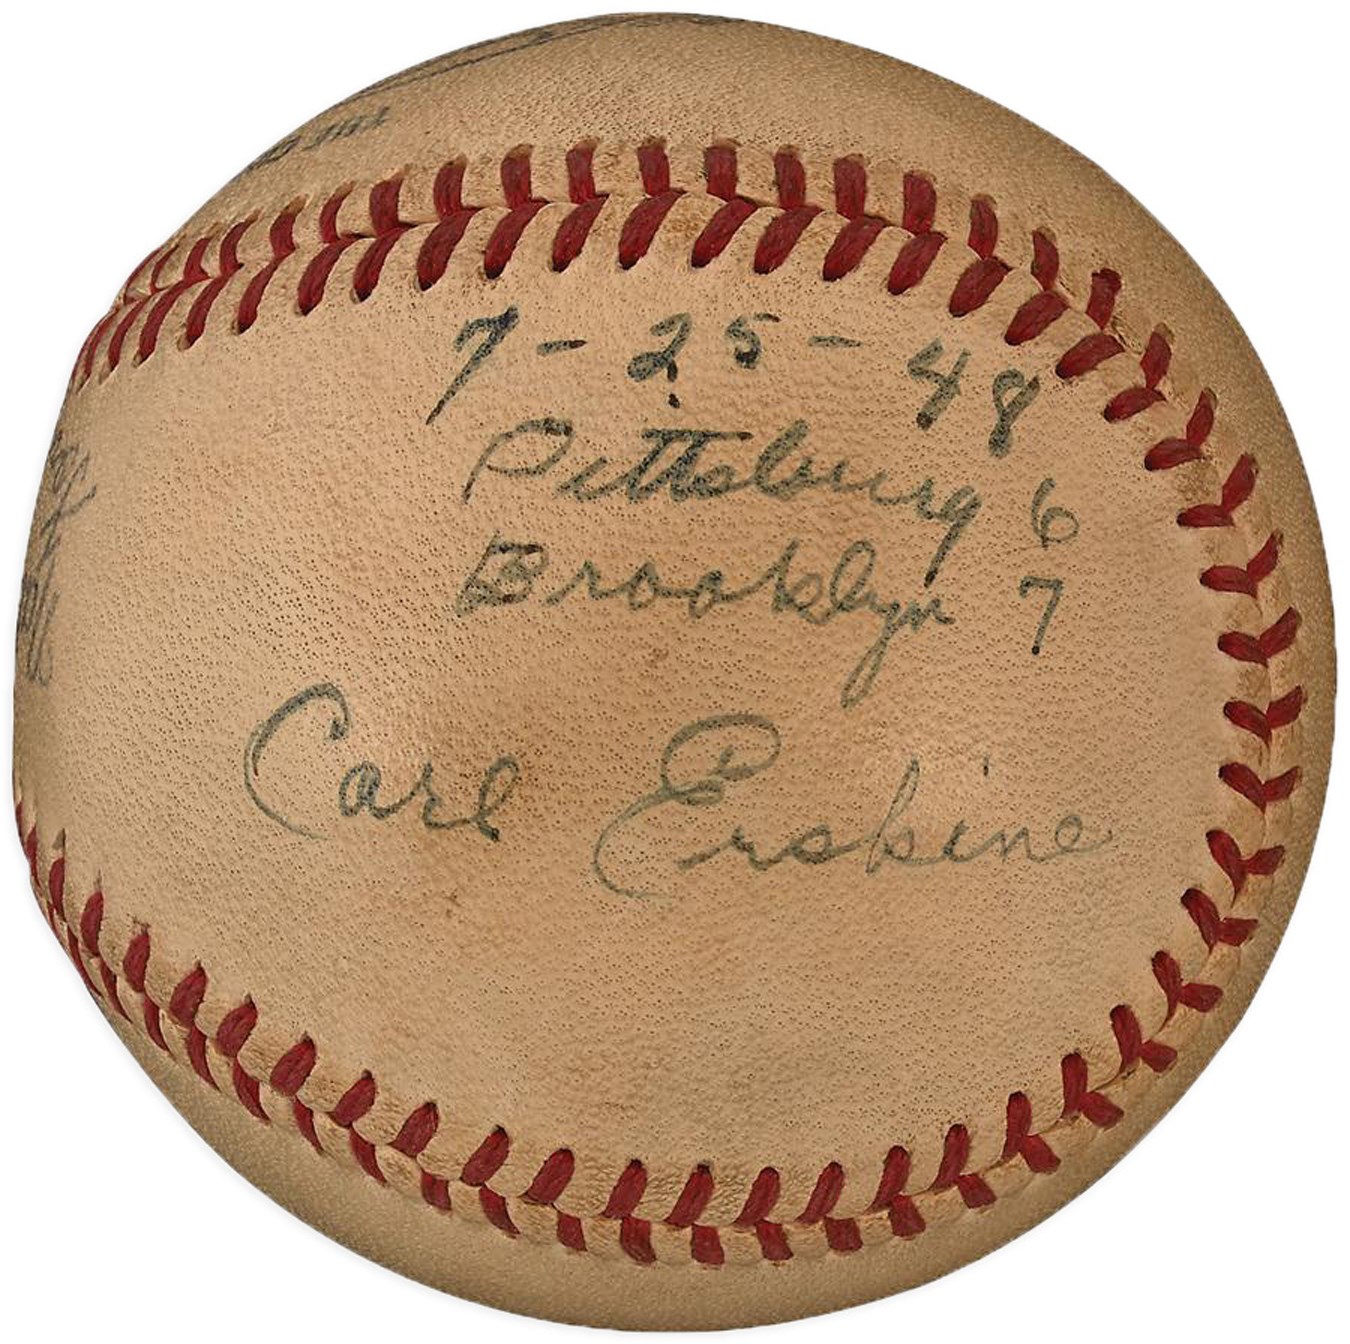 1948 Carl Erskine Last Out Baseball from His First Career Win (PSA)